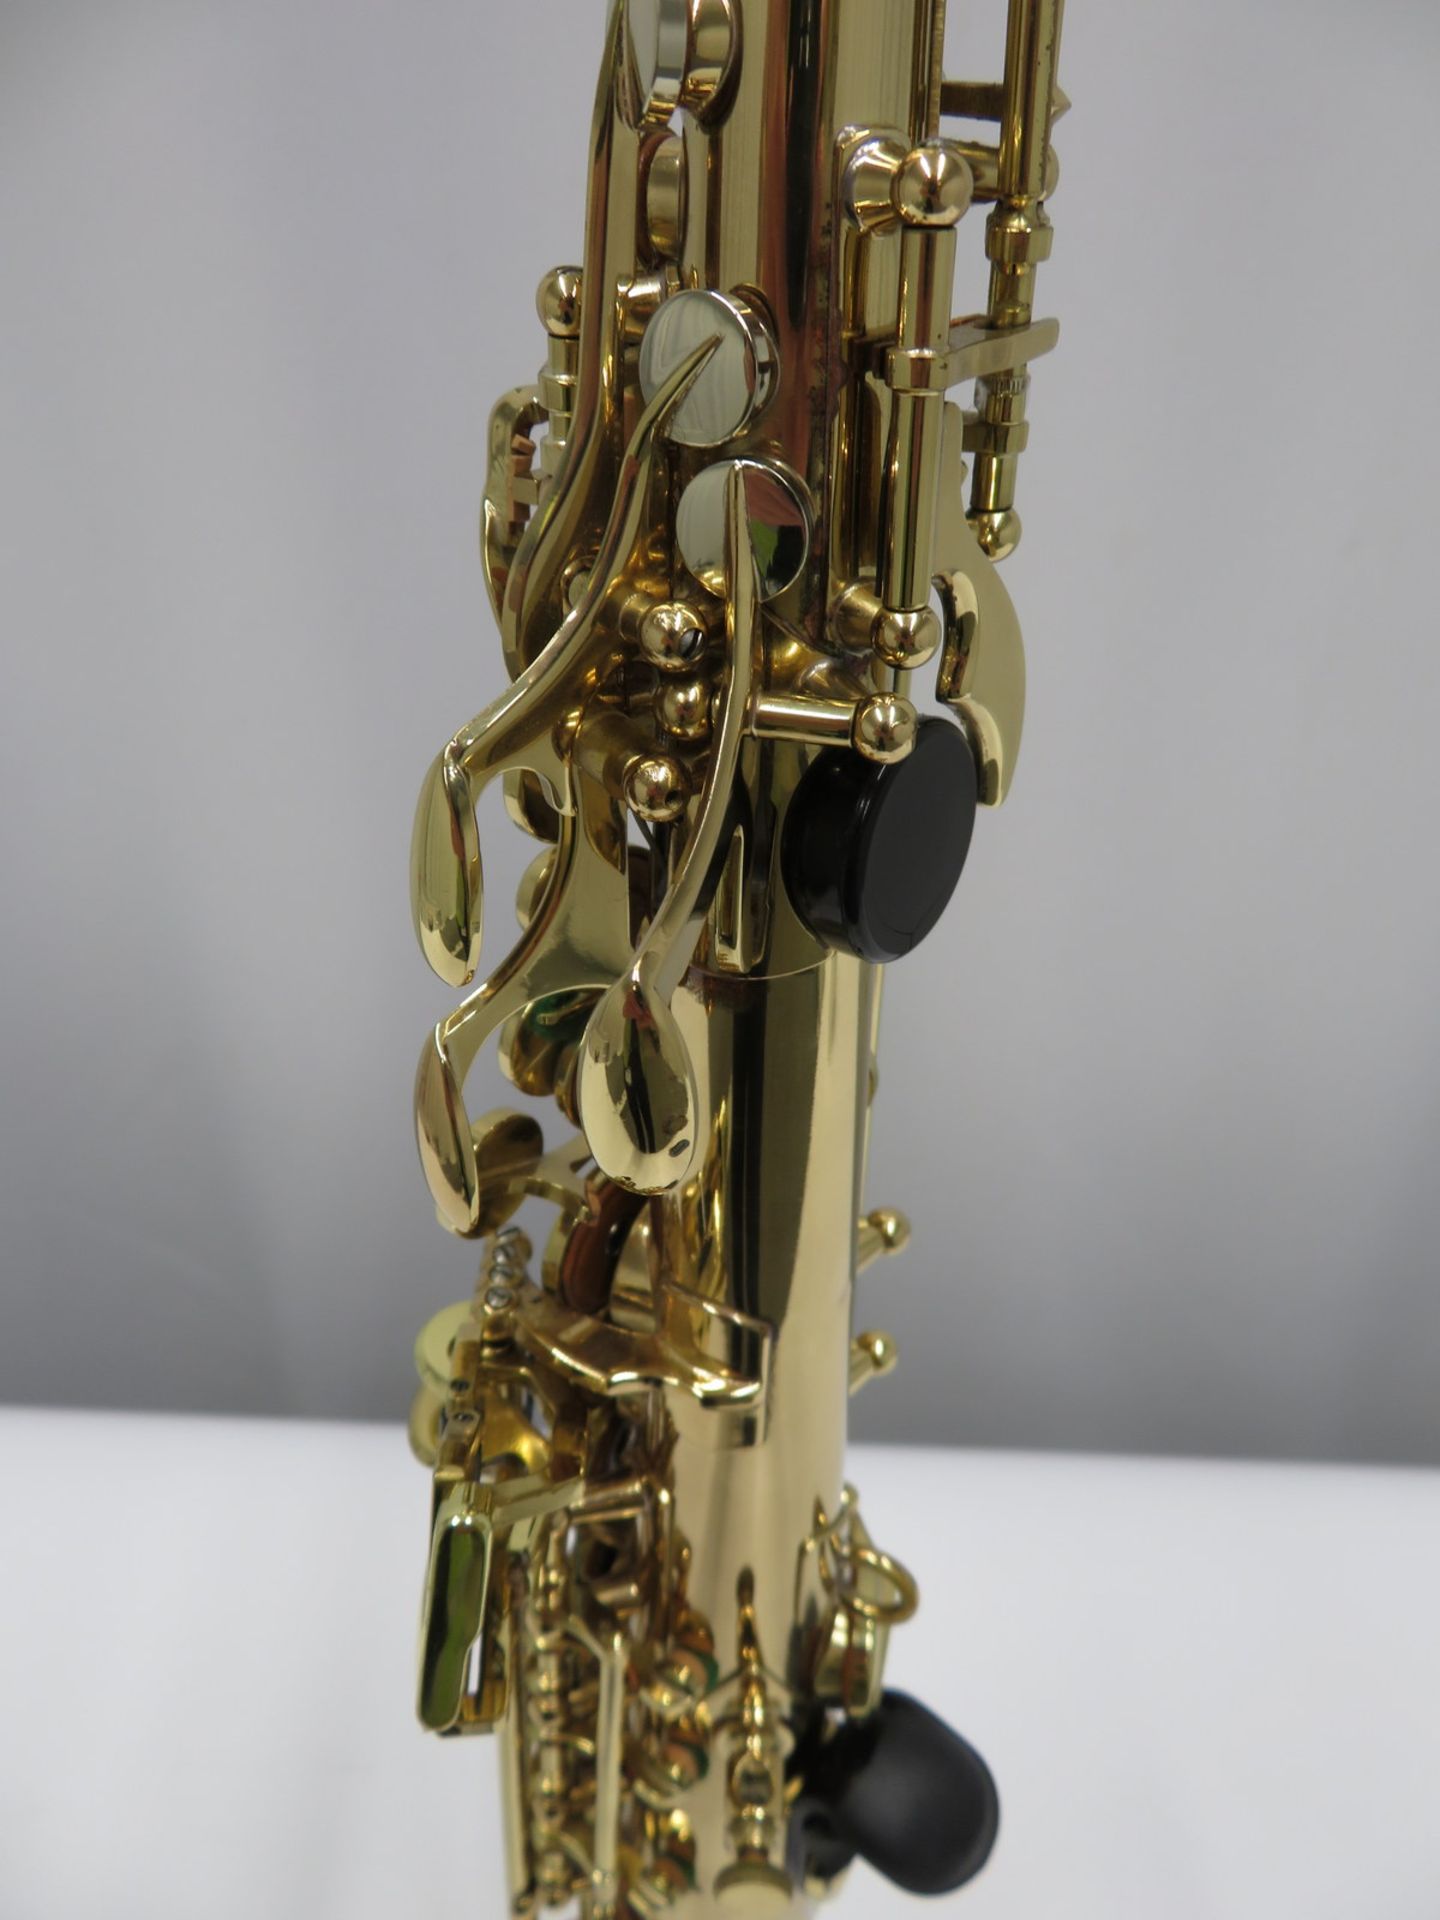 Henri Selmer 80 super action series 2 soprano saxophone with case. Serial number: N.533401. - Image 11 of 22